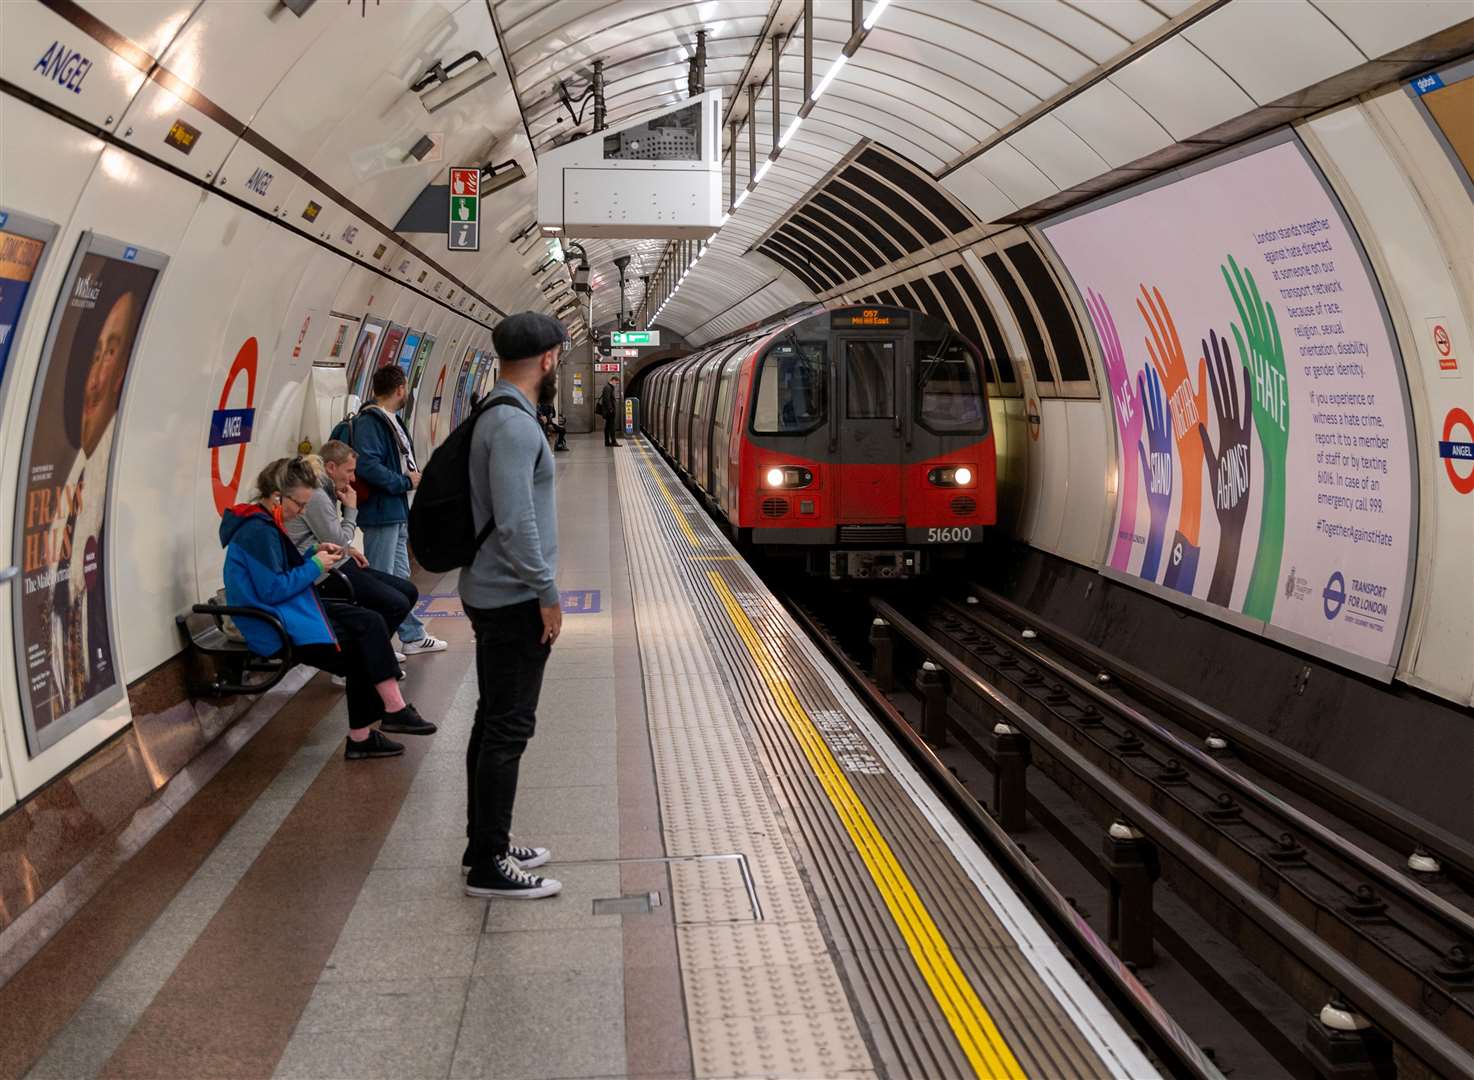 Tube services are facing disruption for six days. Image: iStock.